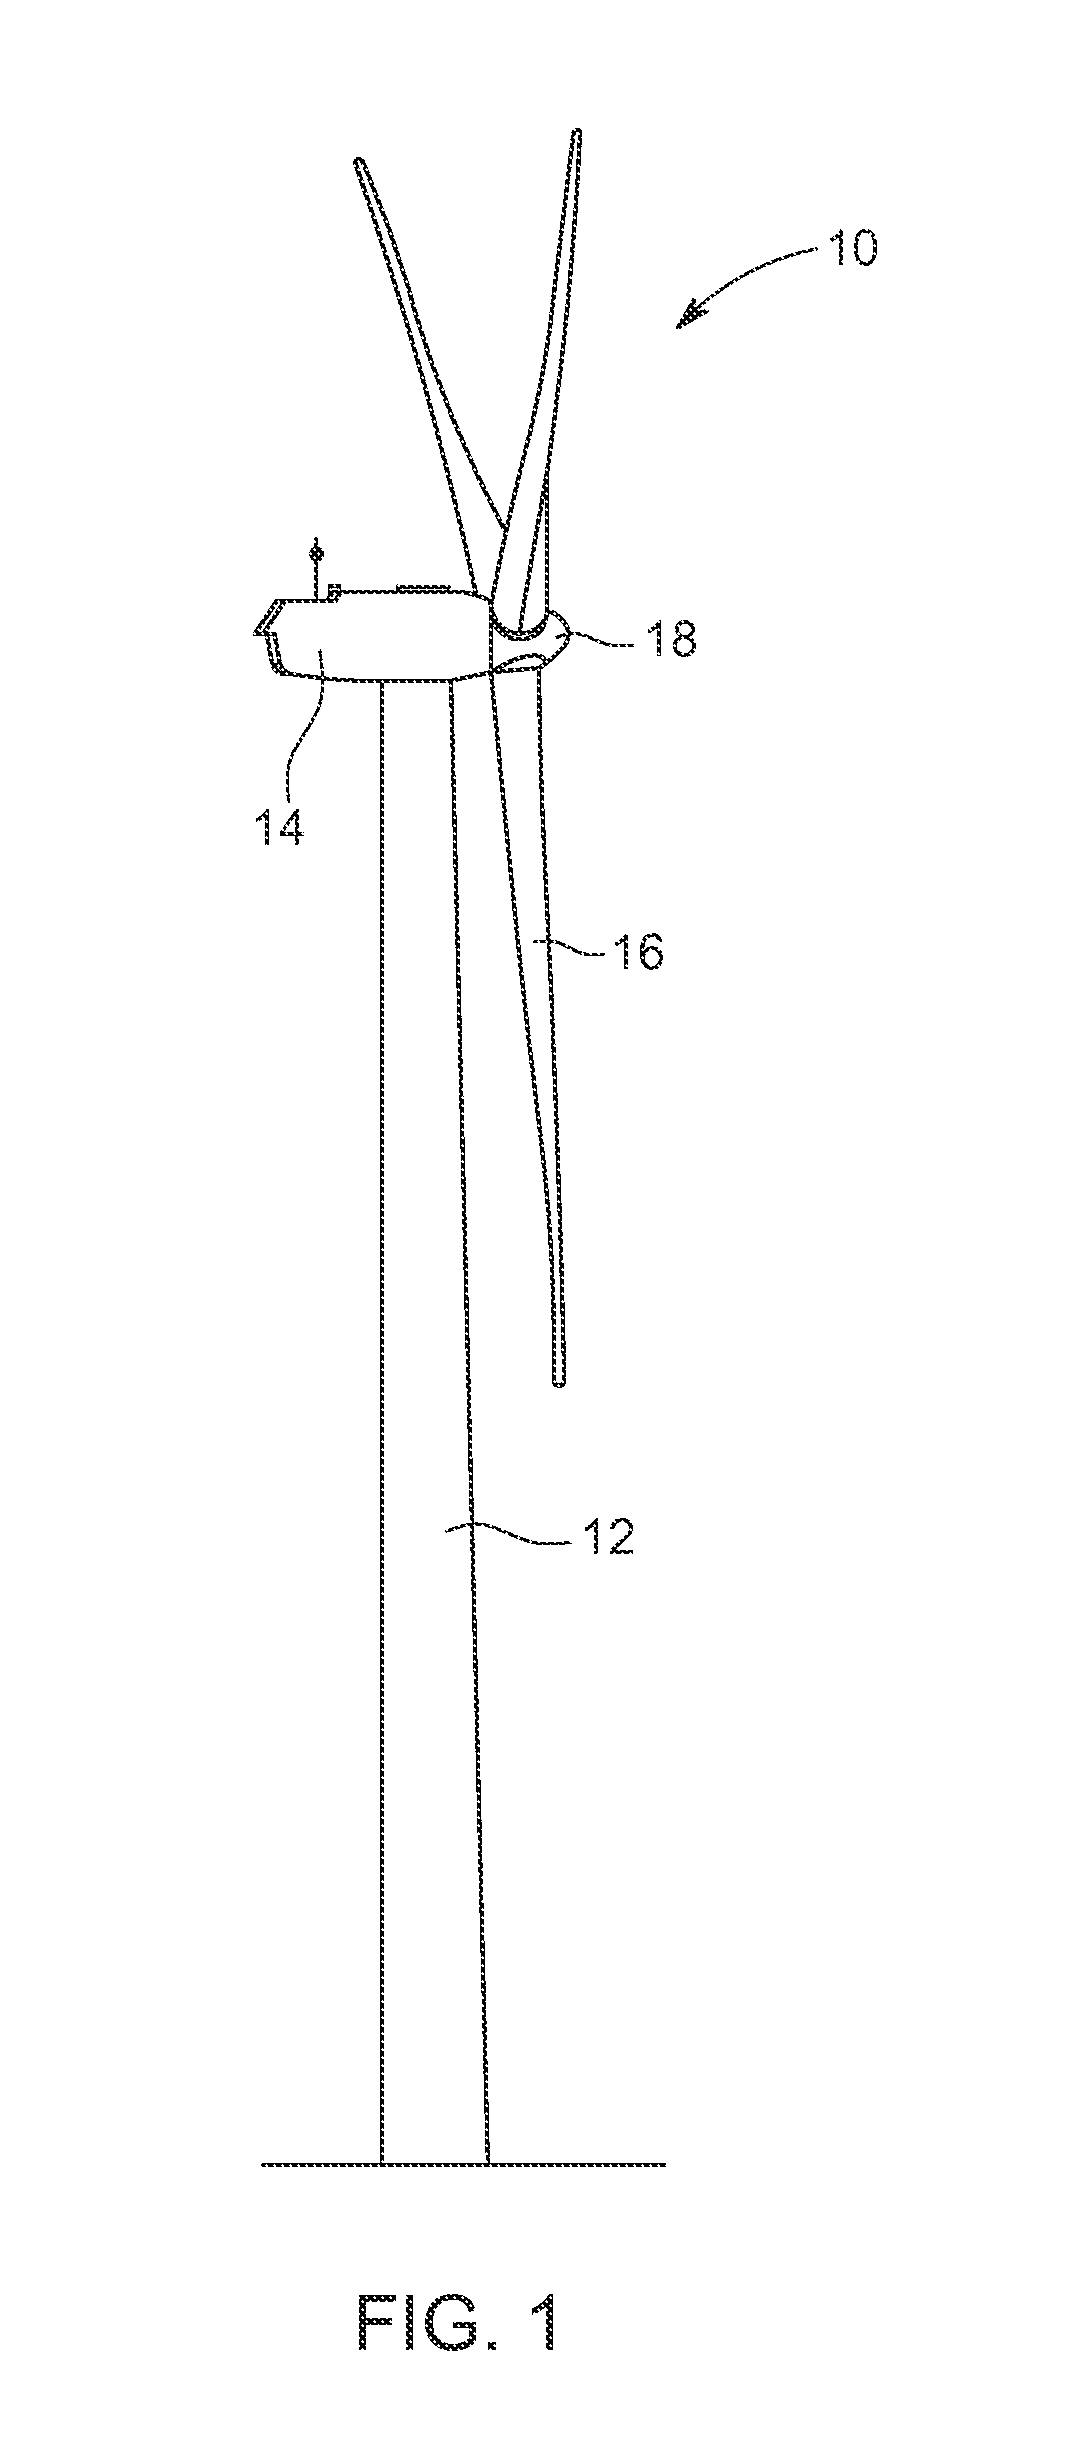 Structural support members with different areal weight fiber reinforcing layers for wind turbine rotor blades